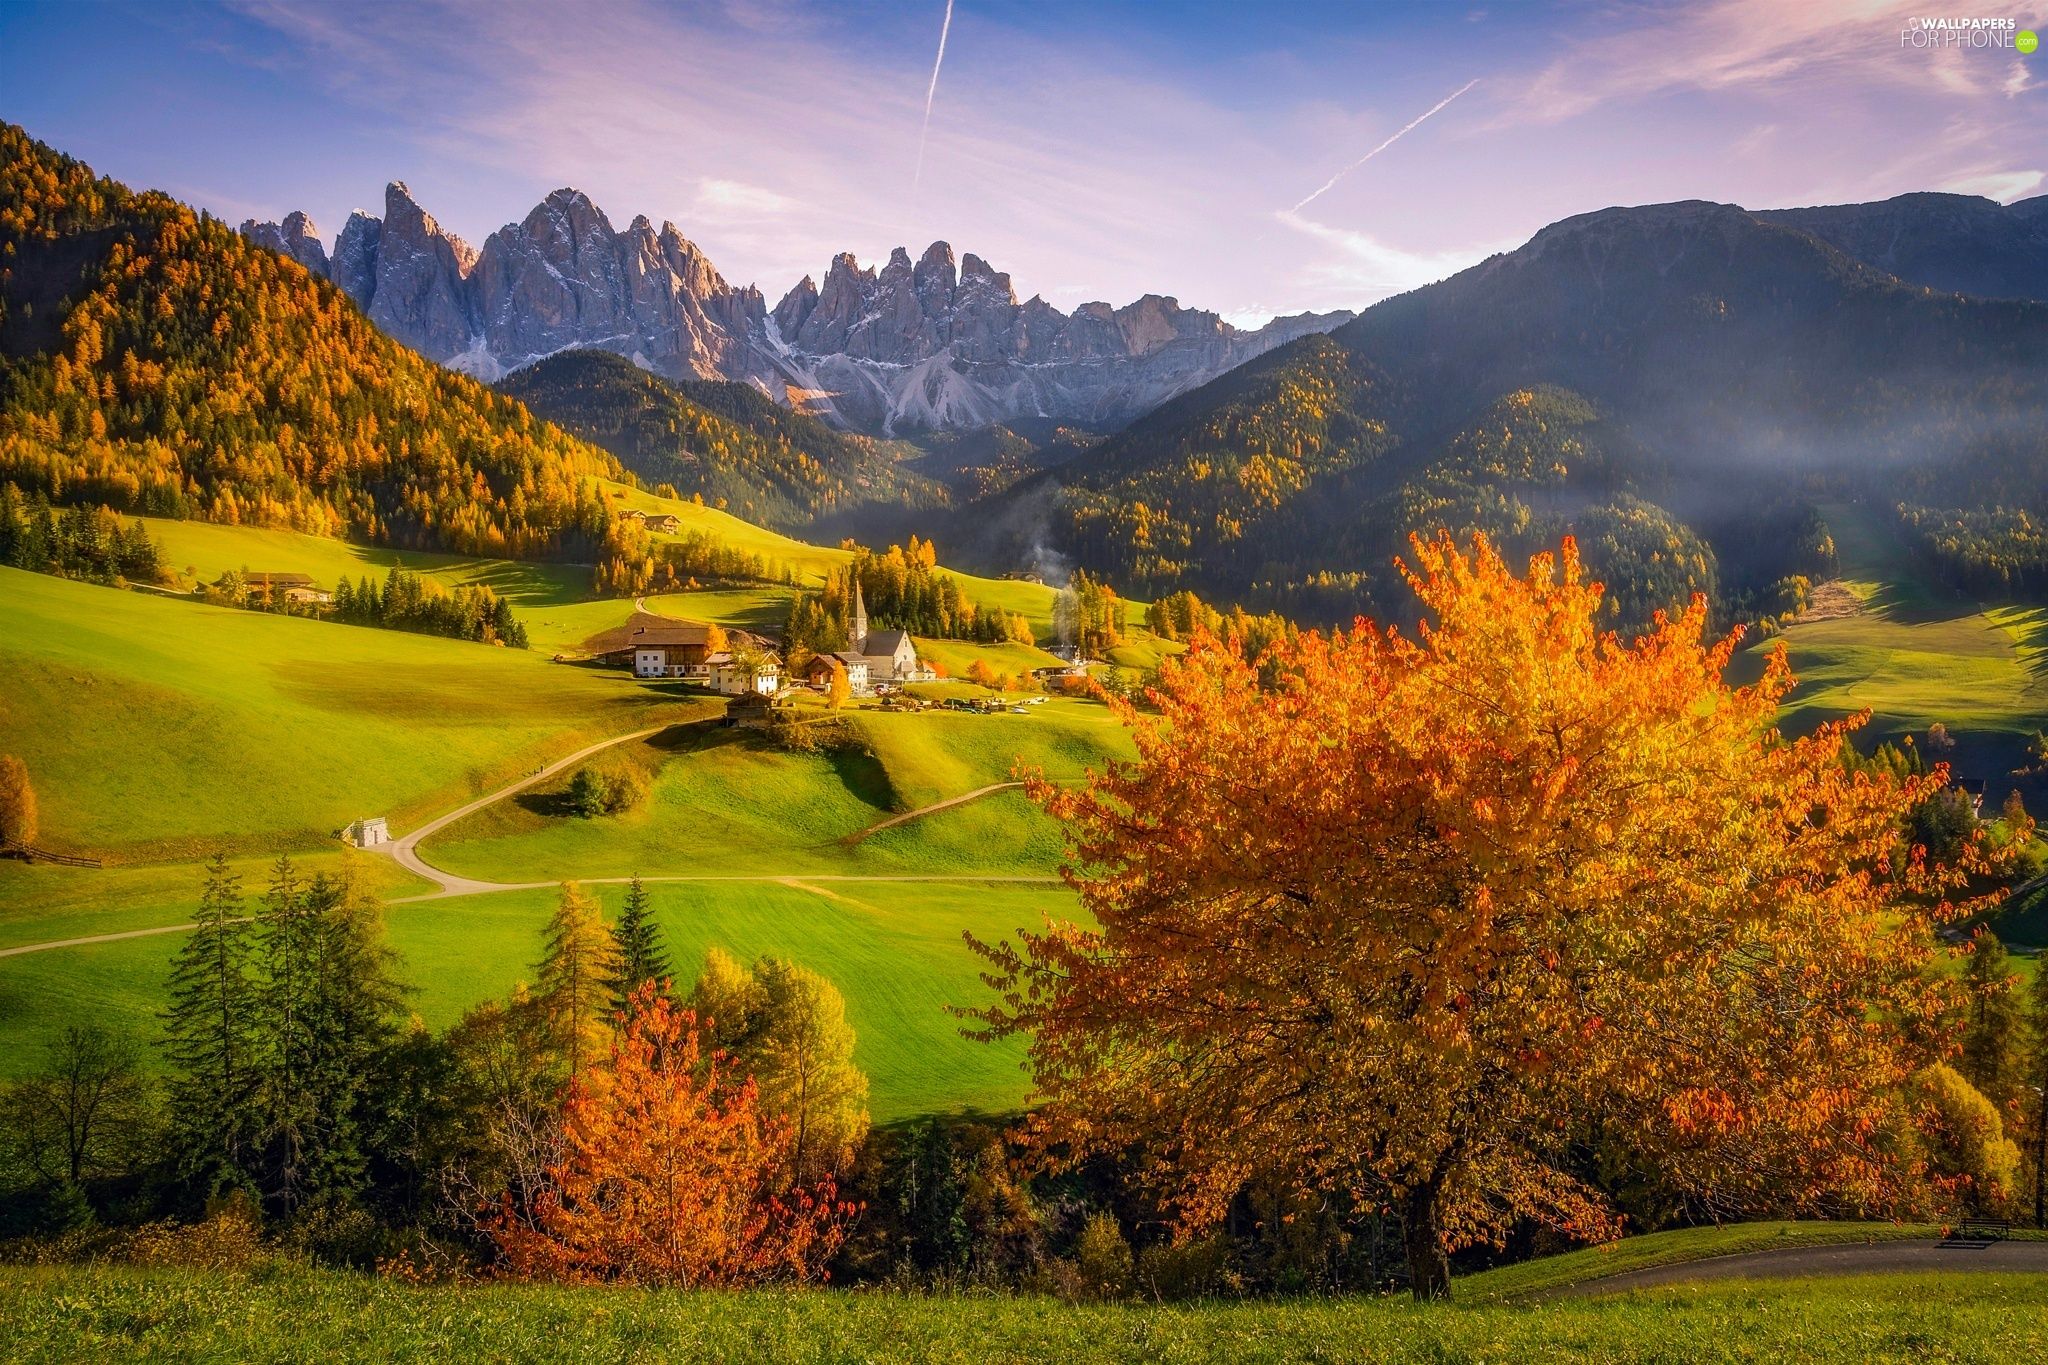 trees, woods, viewes, Mountains, Village of Santa Maddalena, Houses, autumn, Italy, Church, Massif Odle, Val di Funes Valley, Dolomites phone wallpaper: 2048x1365